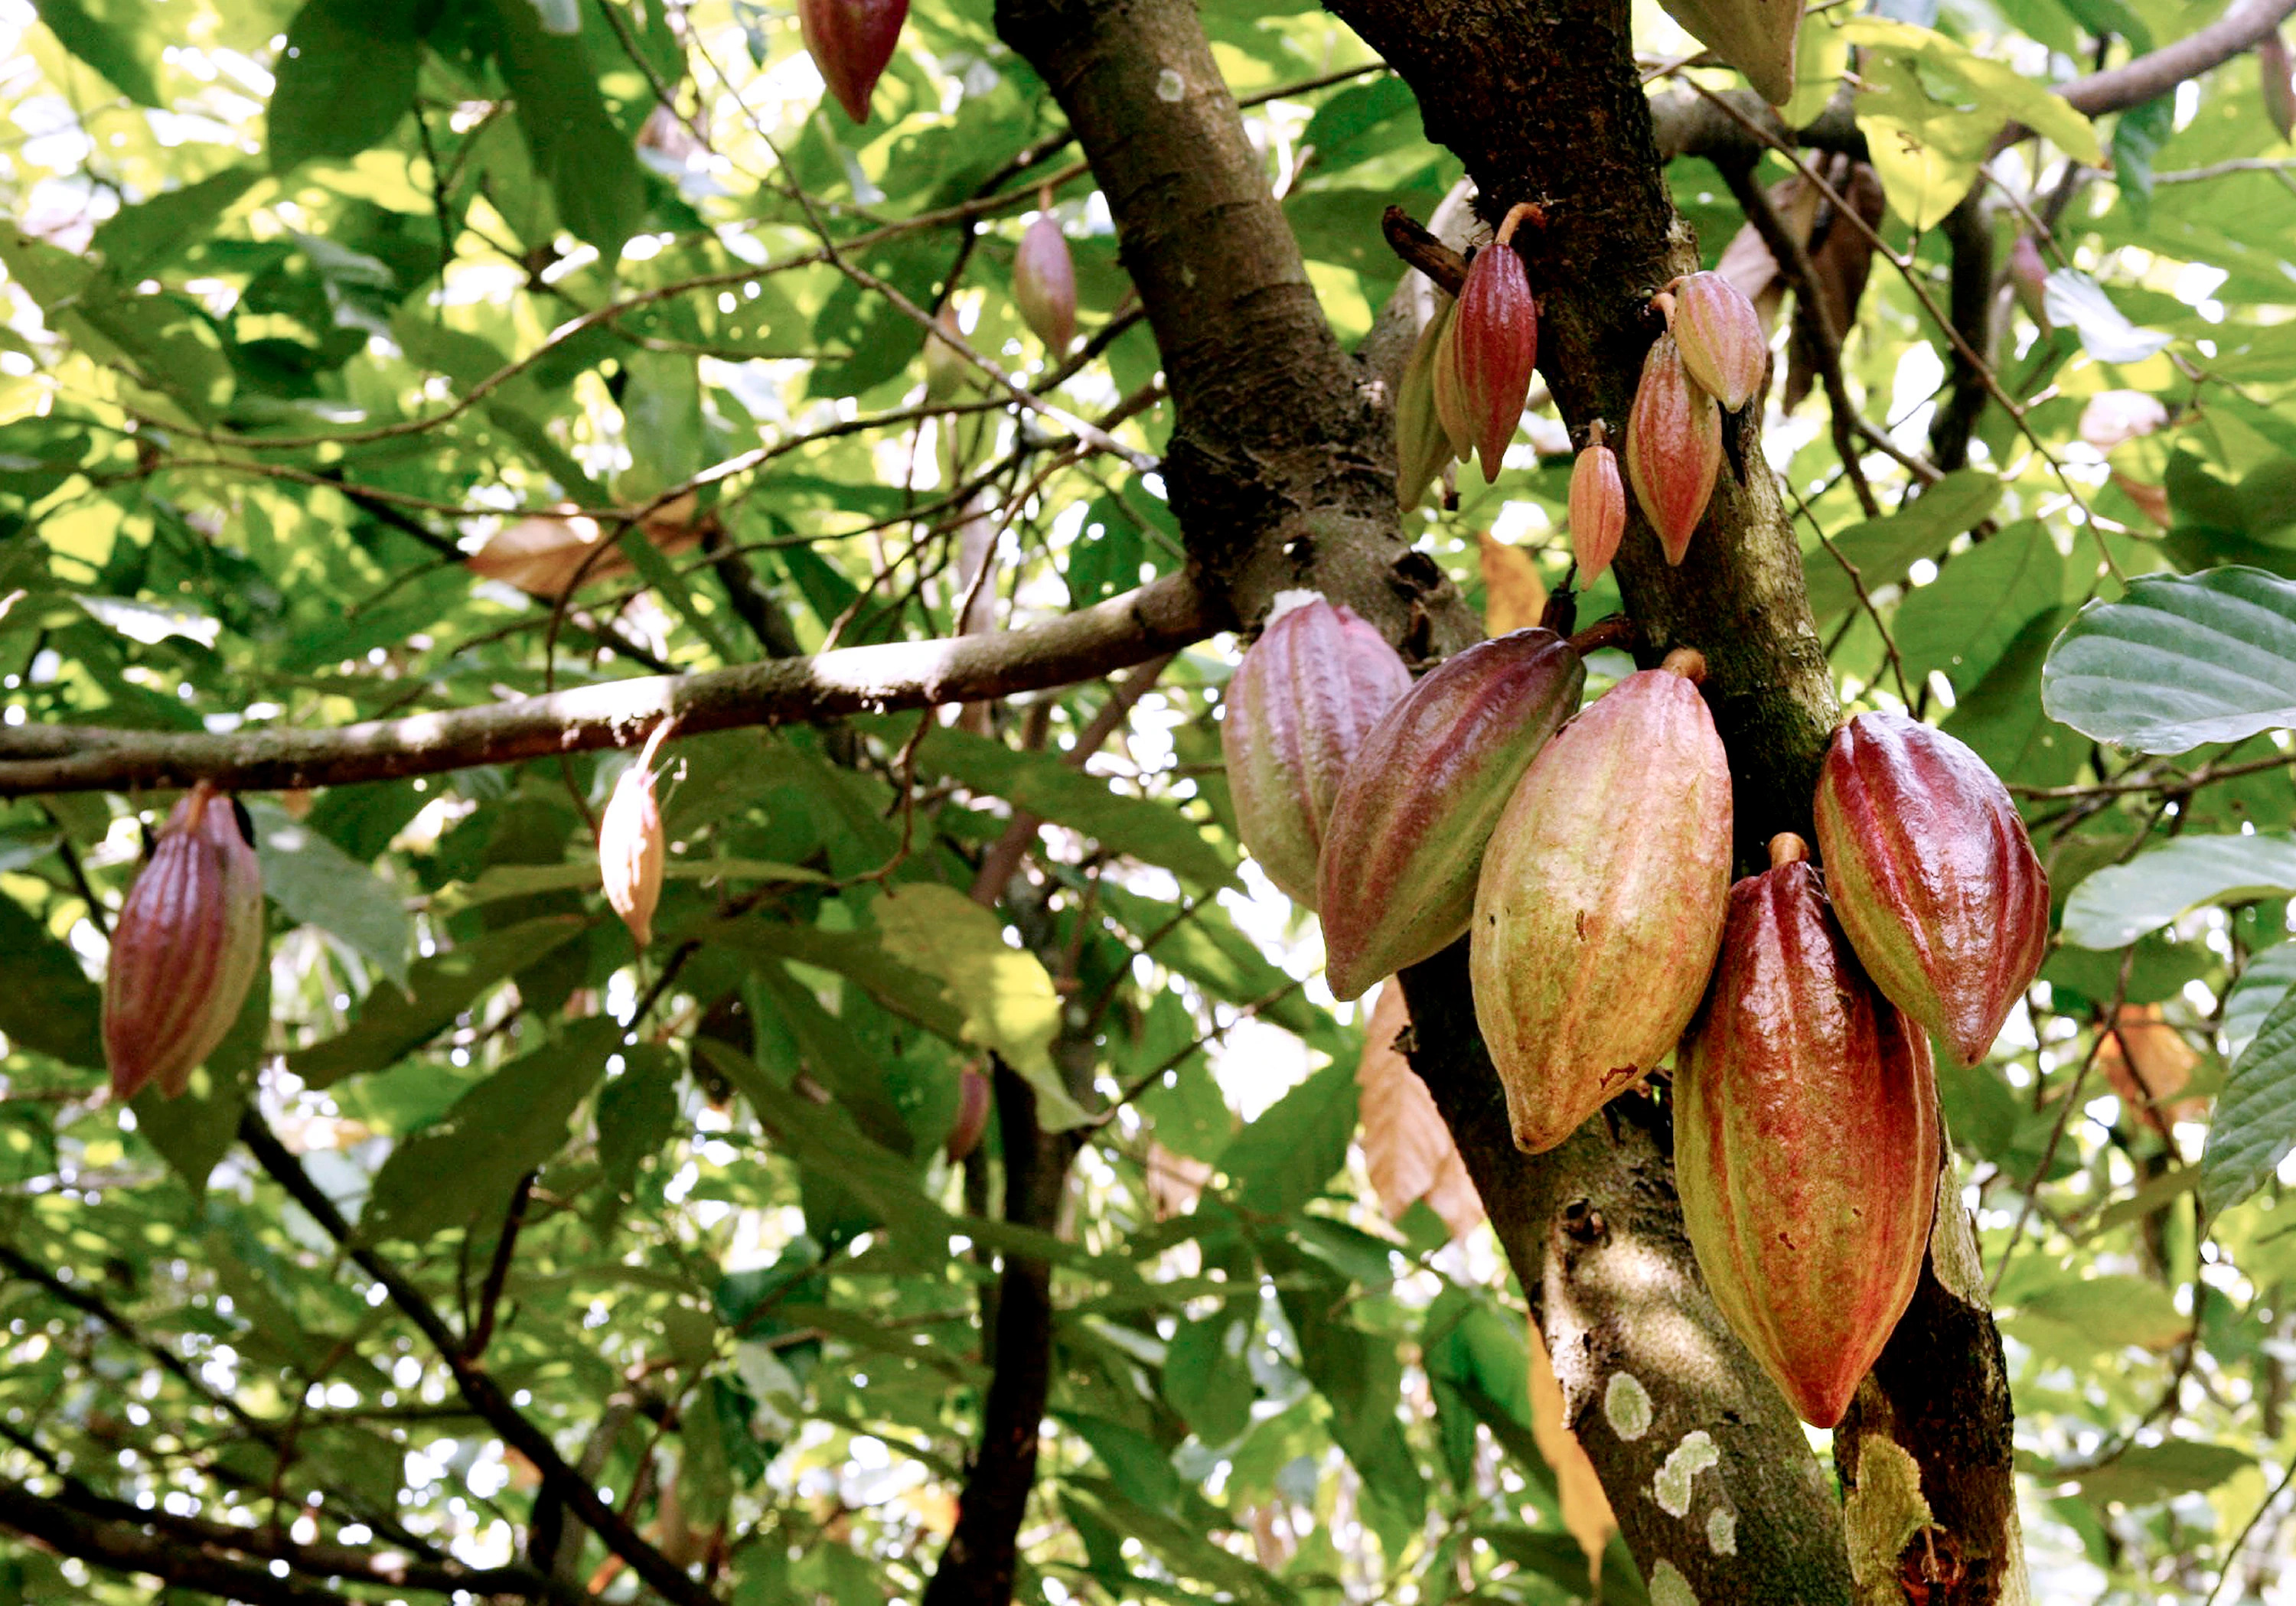 African cocoa trees, Disease-stricken, Time's report, Ongoing battle, 3000x2100 HD Desktop